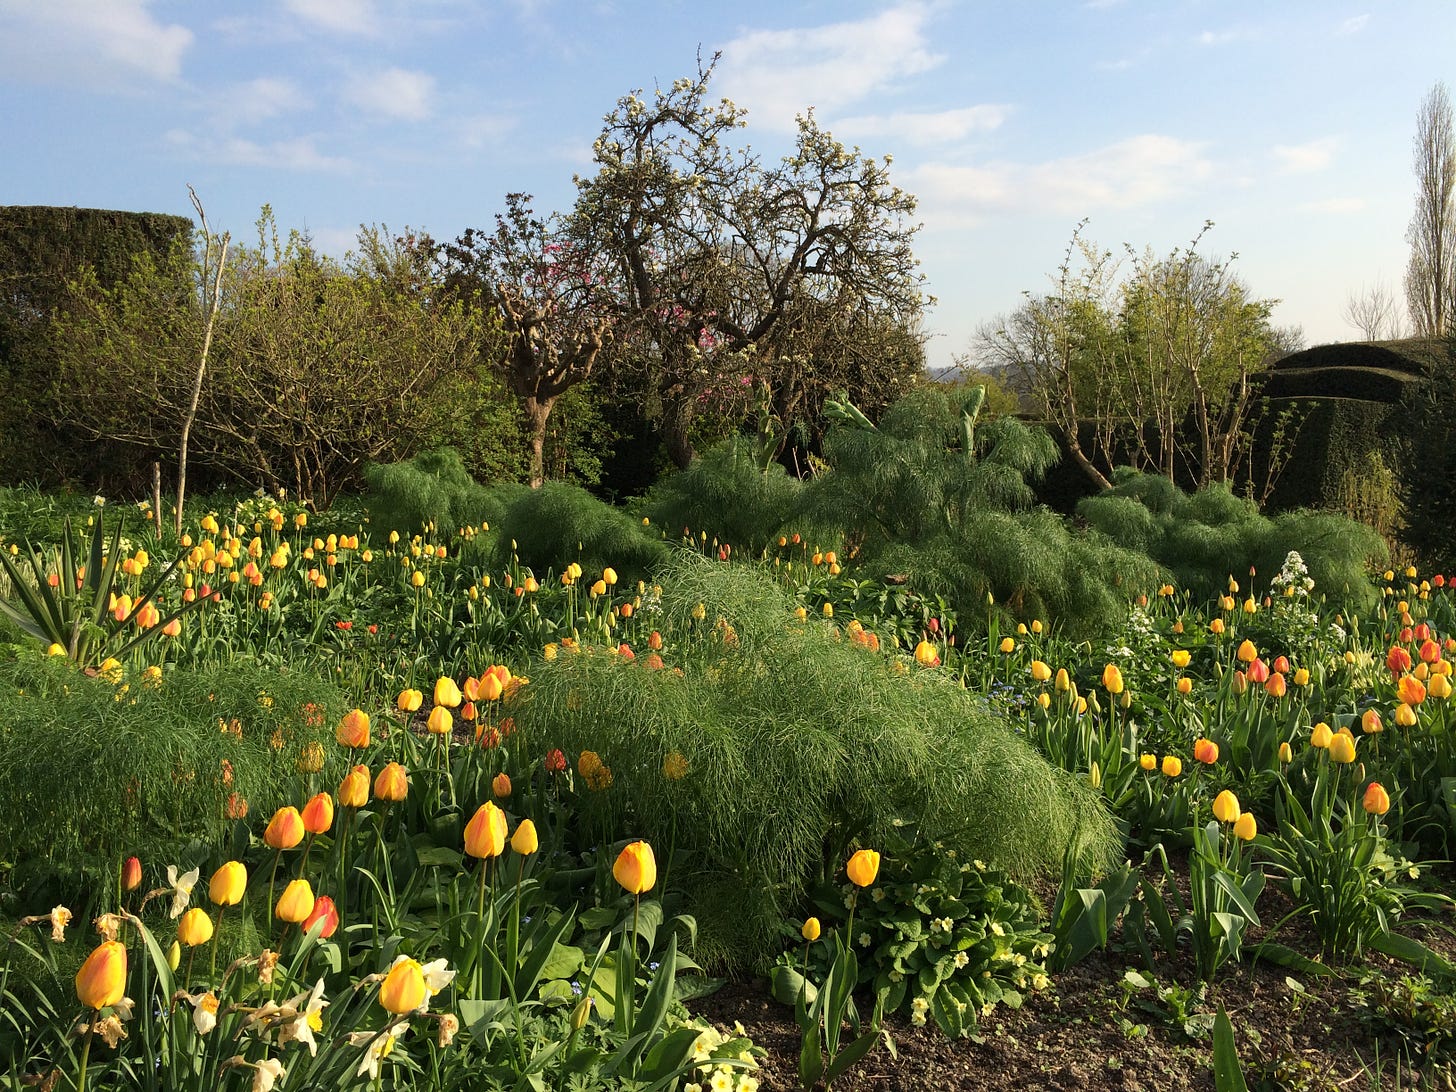 Tulips coming up among the foliage of Giant Fennel at Great Dixter. Photo by Molly Hendry